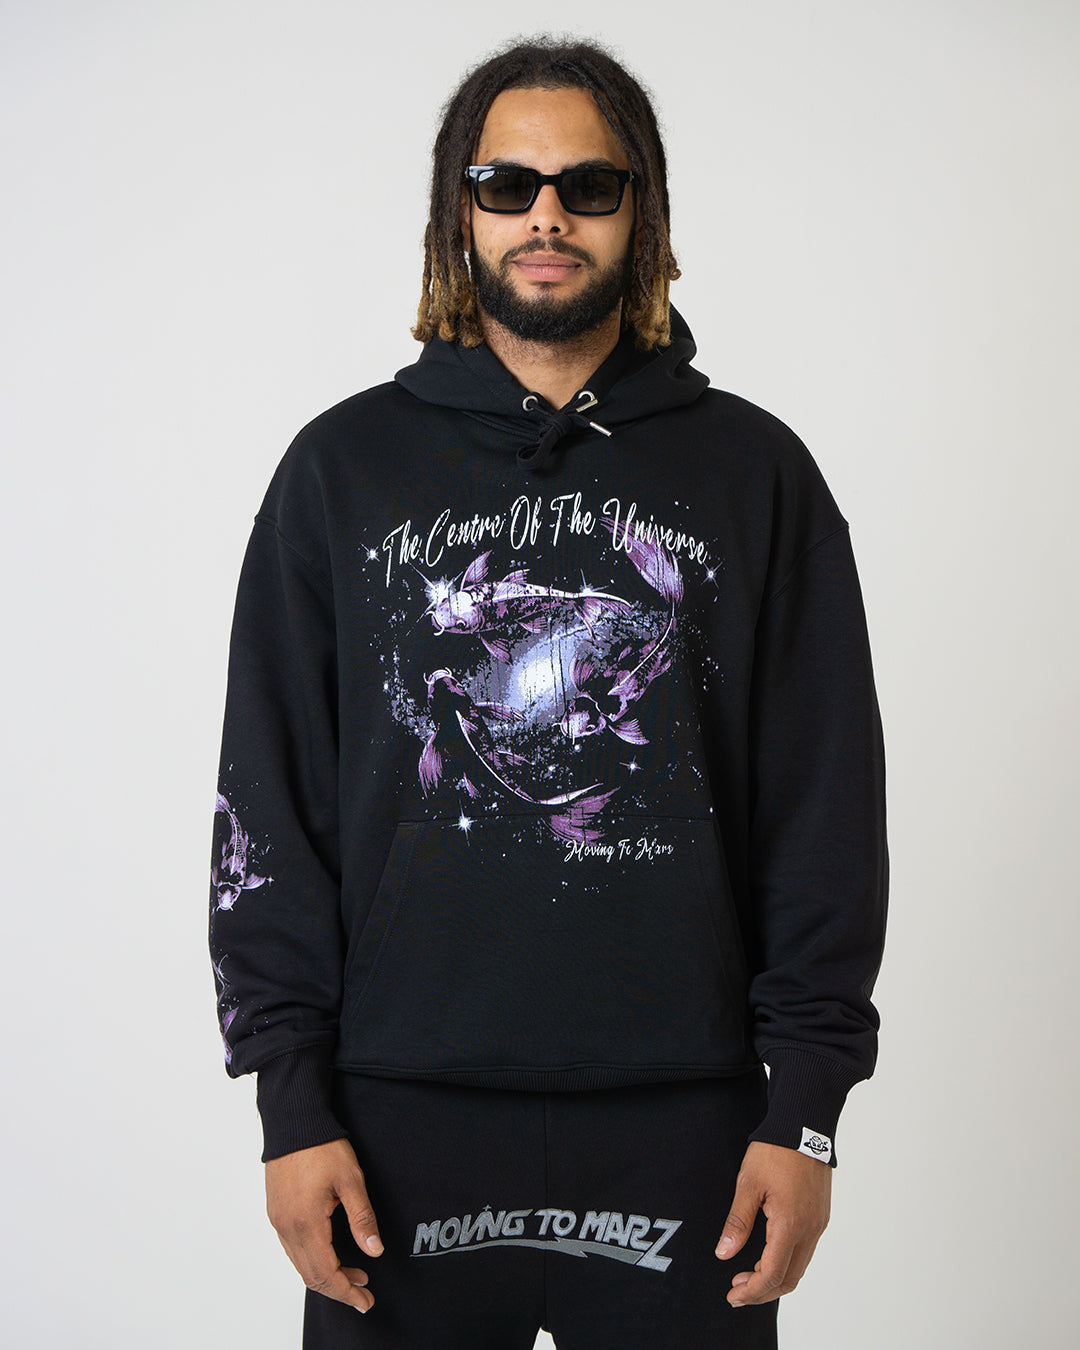 Centre Of The Universe Hoodie